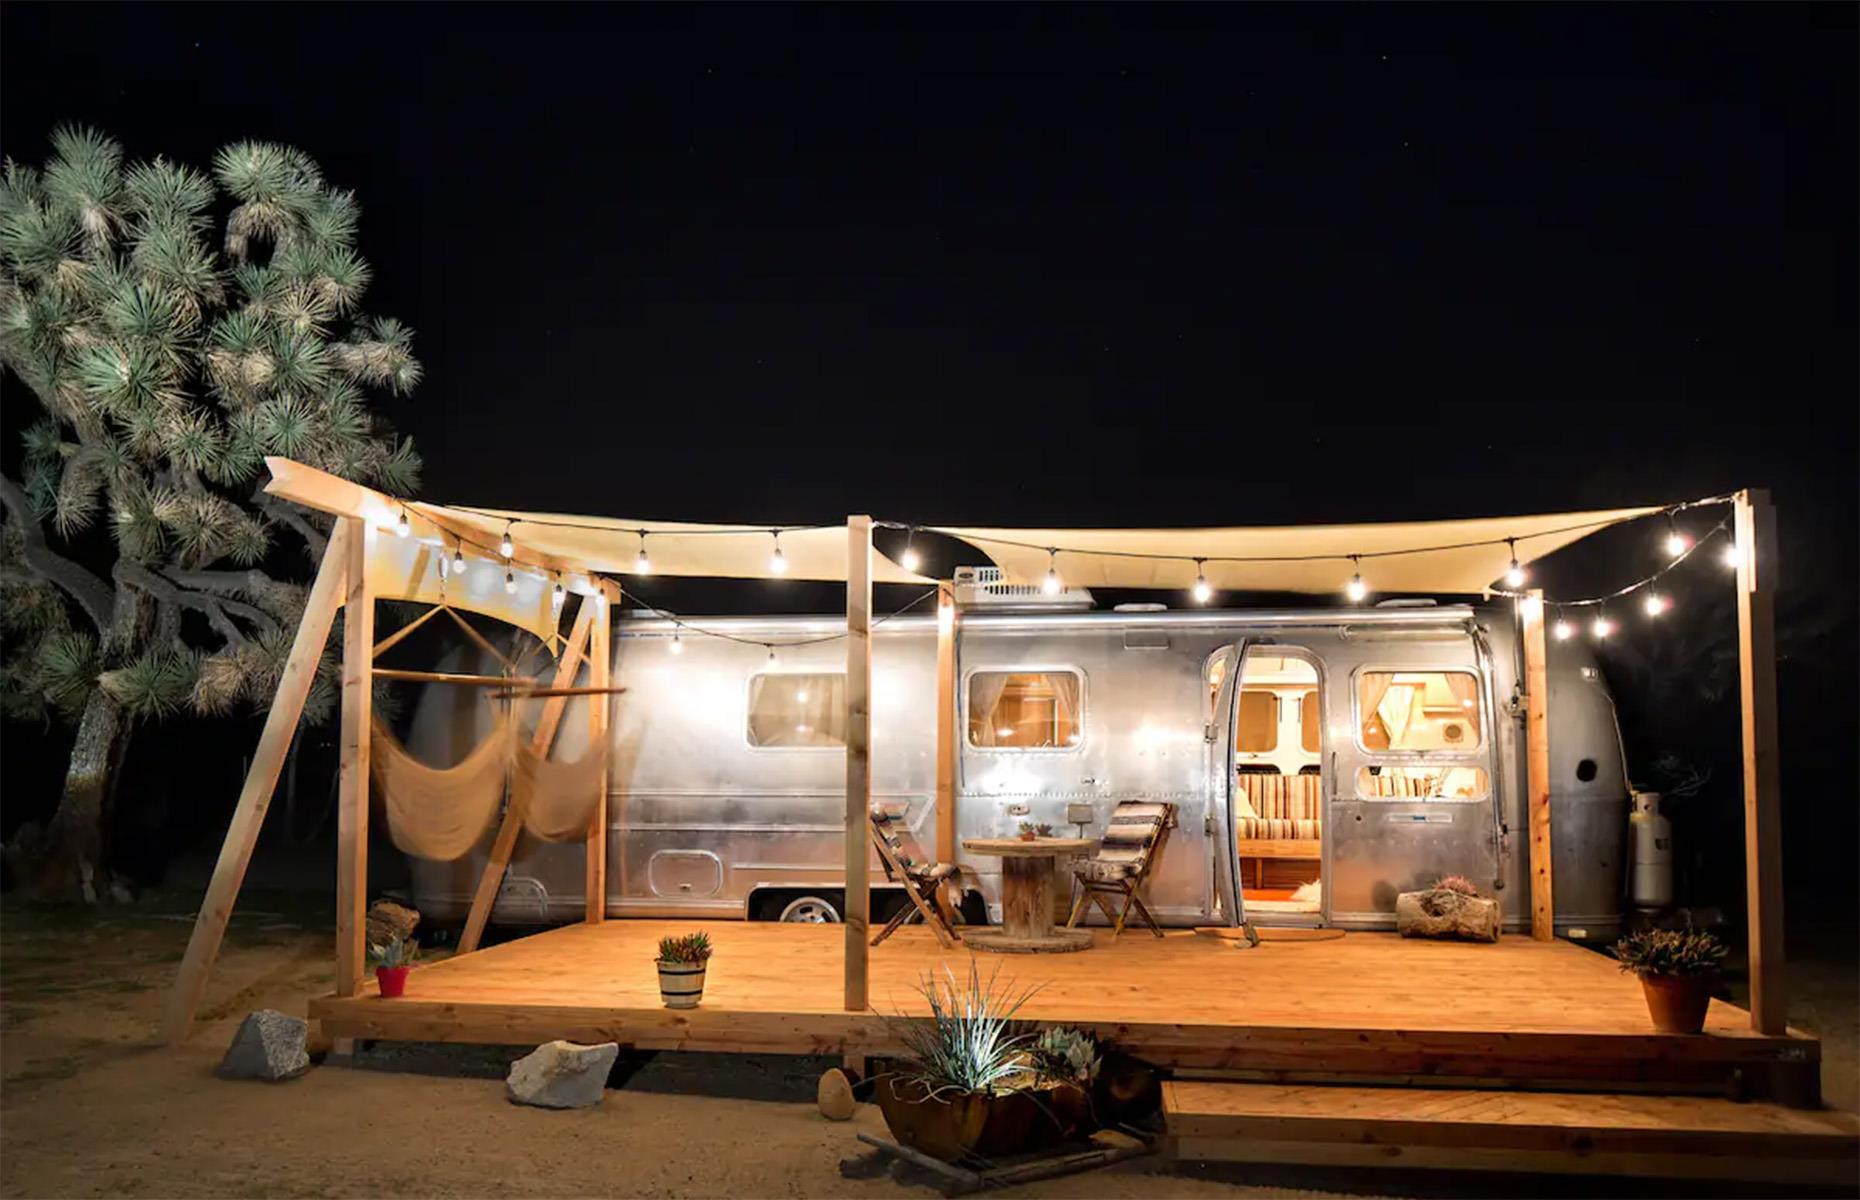 <p>Unlike some of the more modernized trailer projects we’ve seen, this fabulous 1975 Airstream truly embraces its origins with a renovation that's faithful to its playful heyday.</p>  <p>Alongside that beautifully restored exterior, there's a large wooden deck adorned with shade sails, fairy lights and two hammocks – perfect for a cozy evening of stargazing.</p>